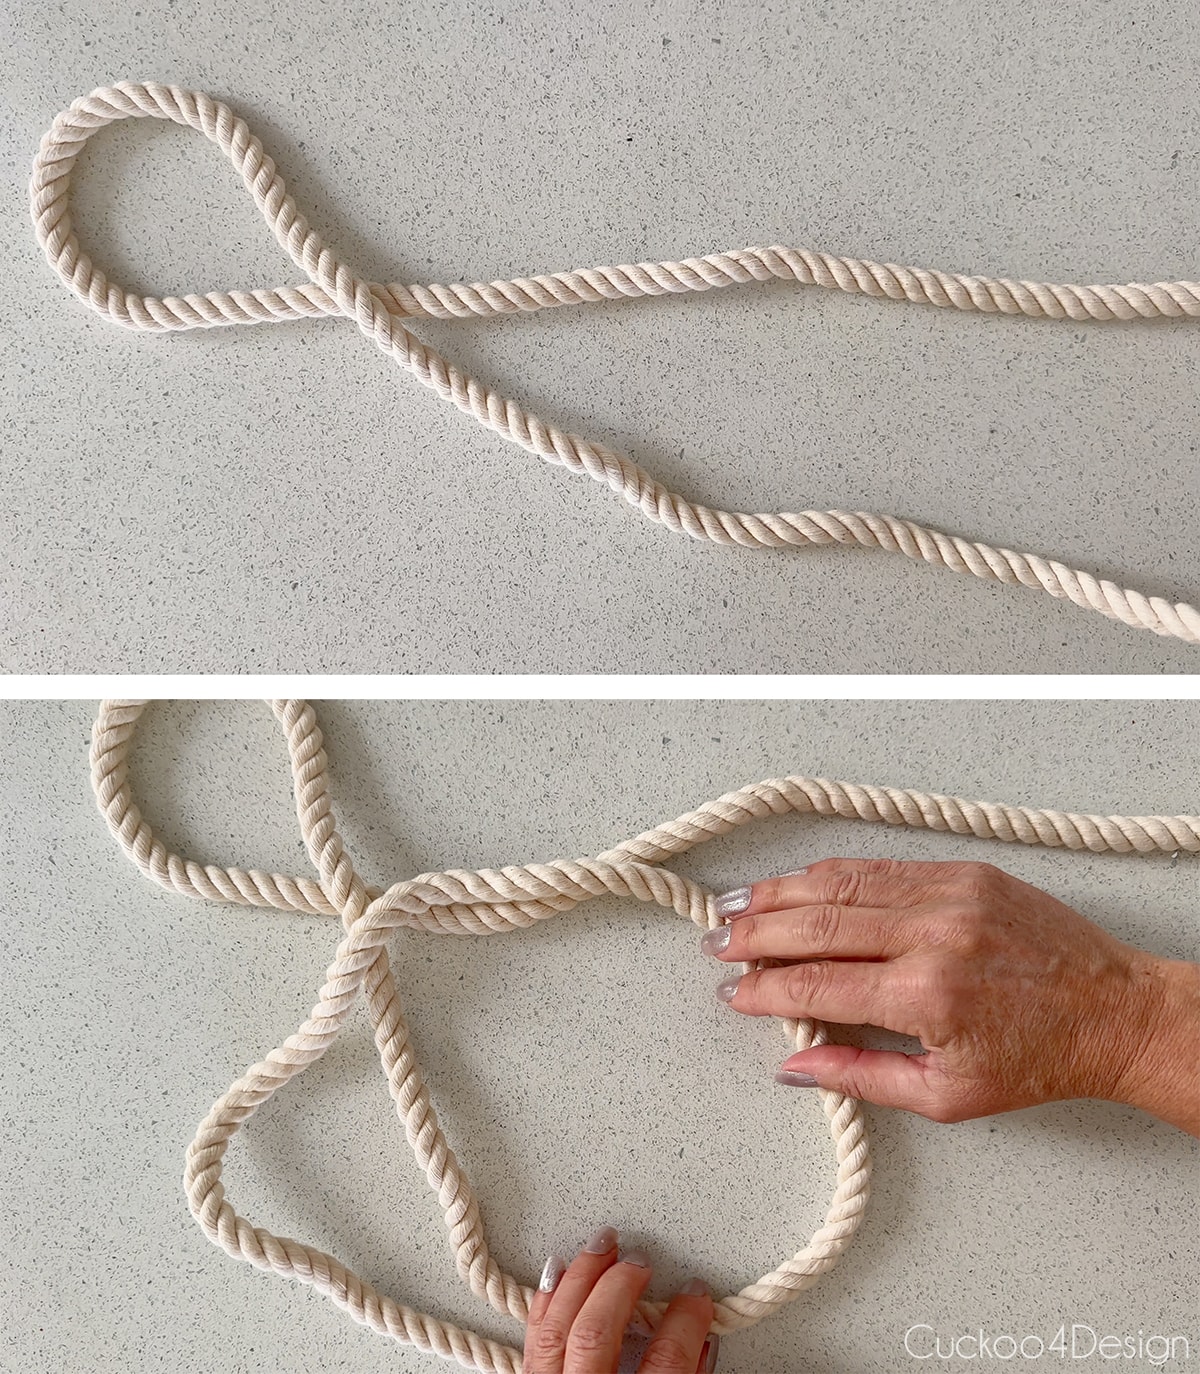 starting out the Pipa Knot with thick soft macrame yarn